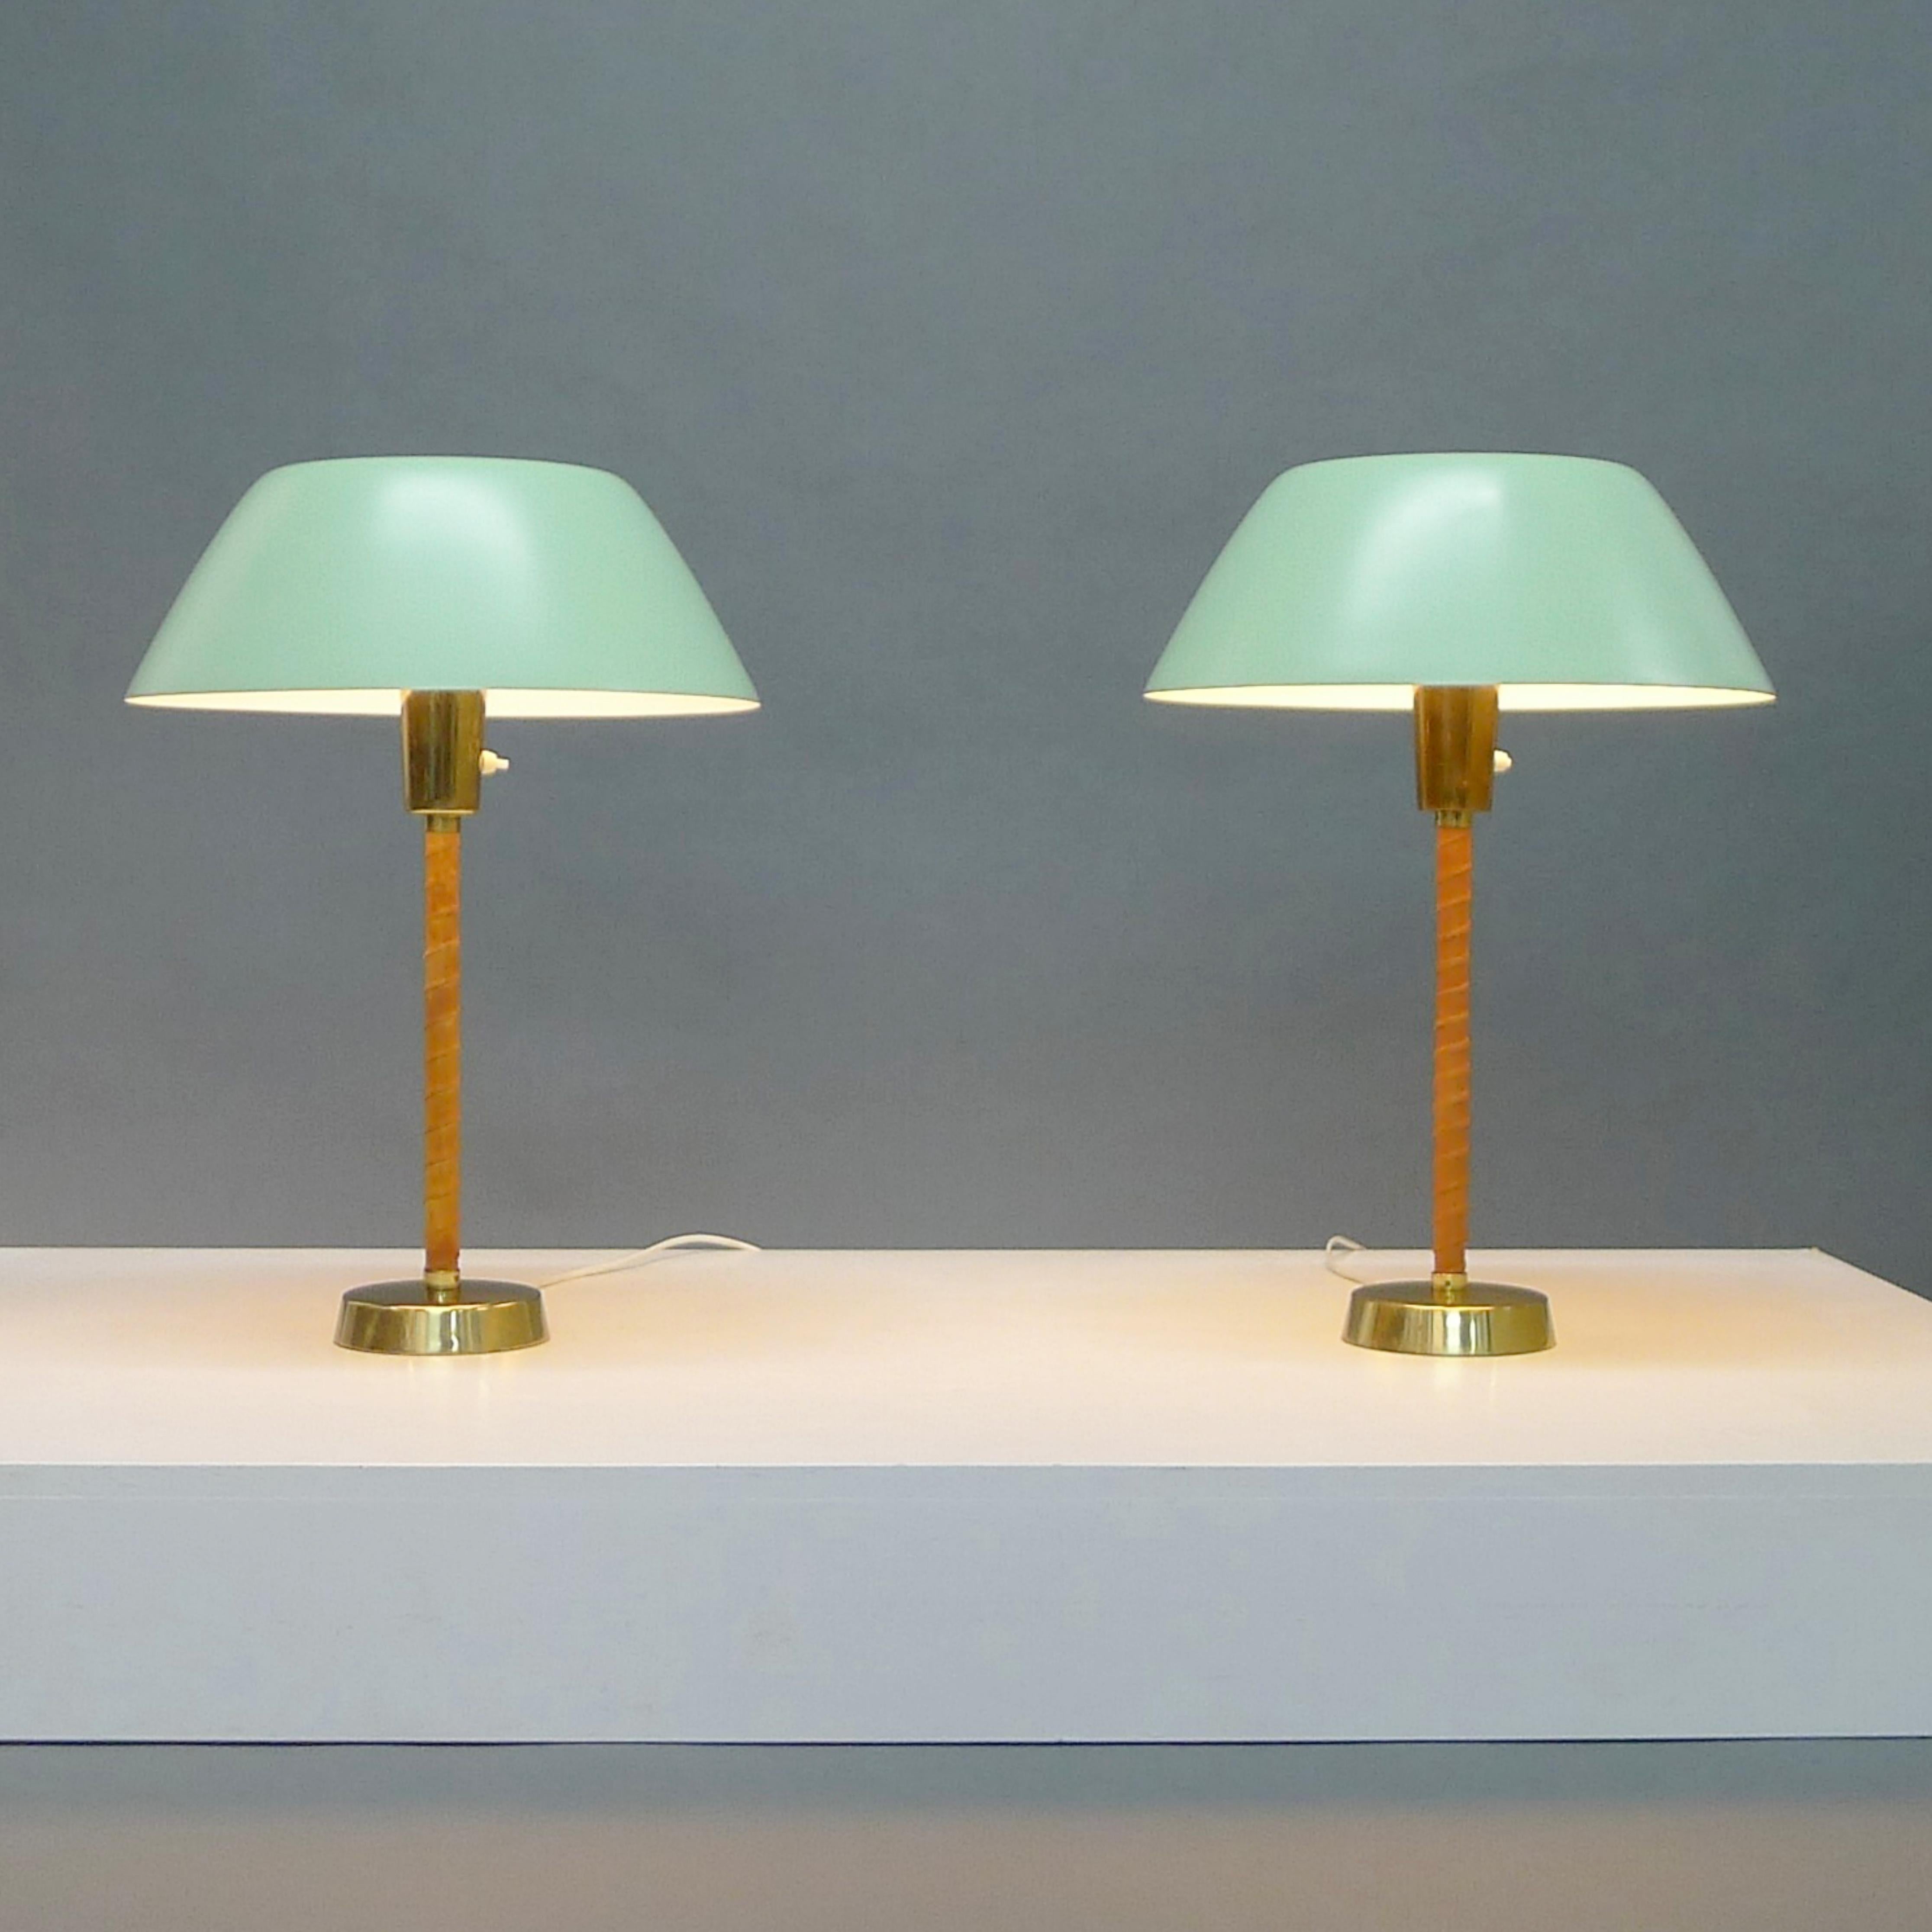 Elegant pair of Senator table lamps, designed by Lisa Johansson-Pape in 1947 and manufactured by Stockmann-Orno Oy, Finland.

Each spun aluminium shade lacquered in a sea foam green colour rests on a white acrylic diffuser, raised on a leather